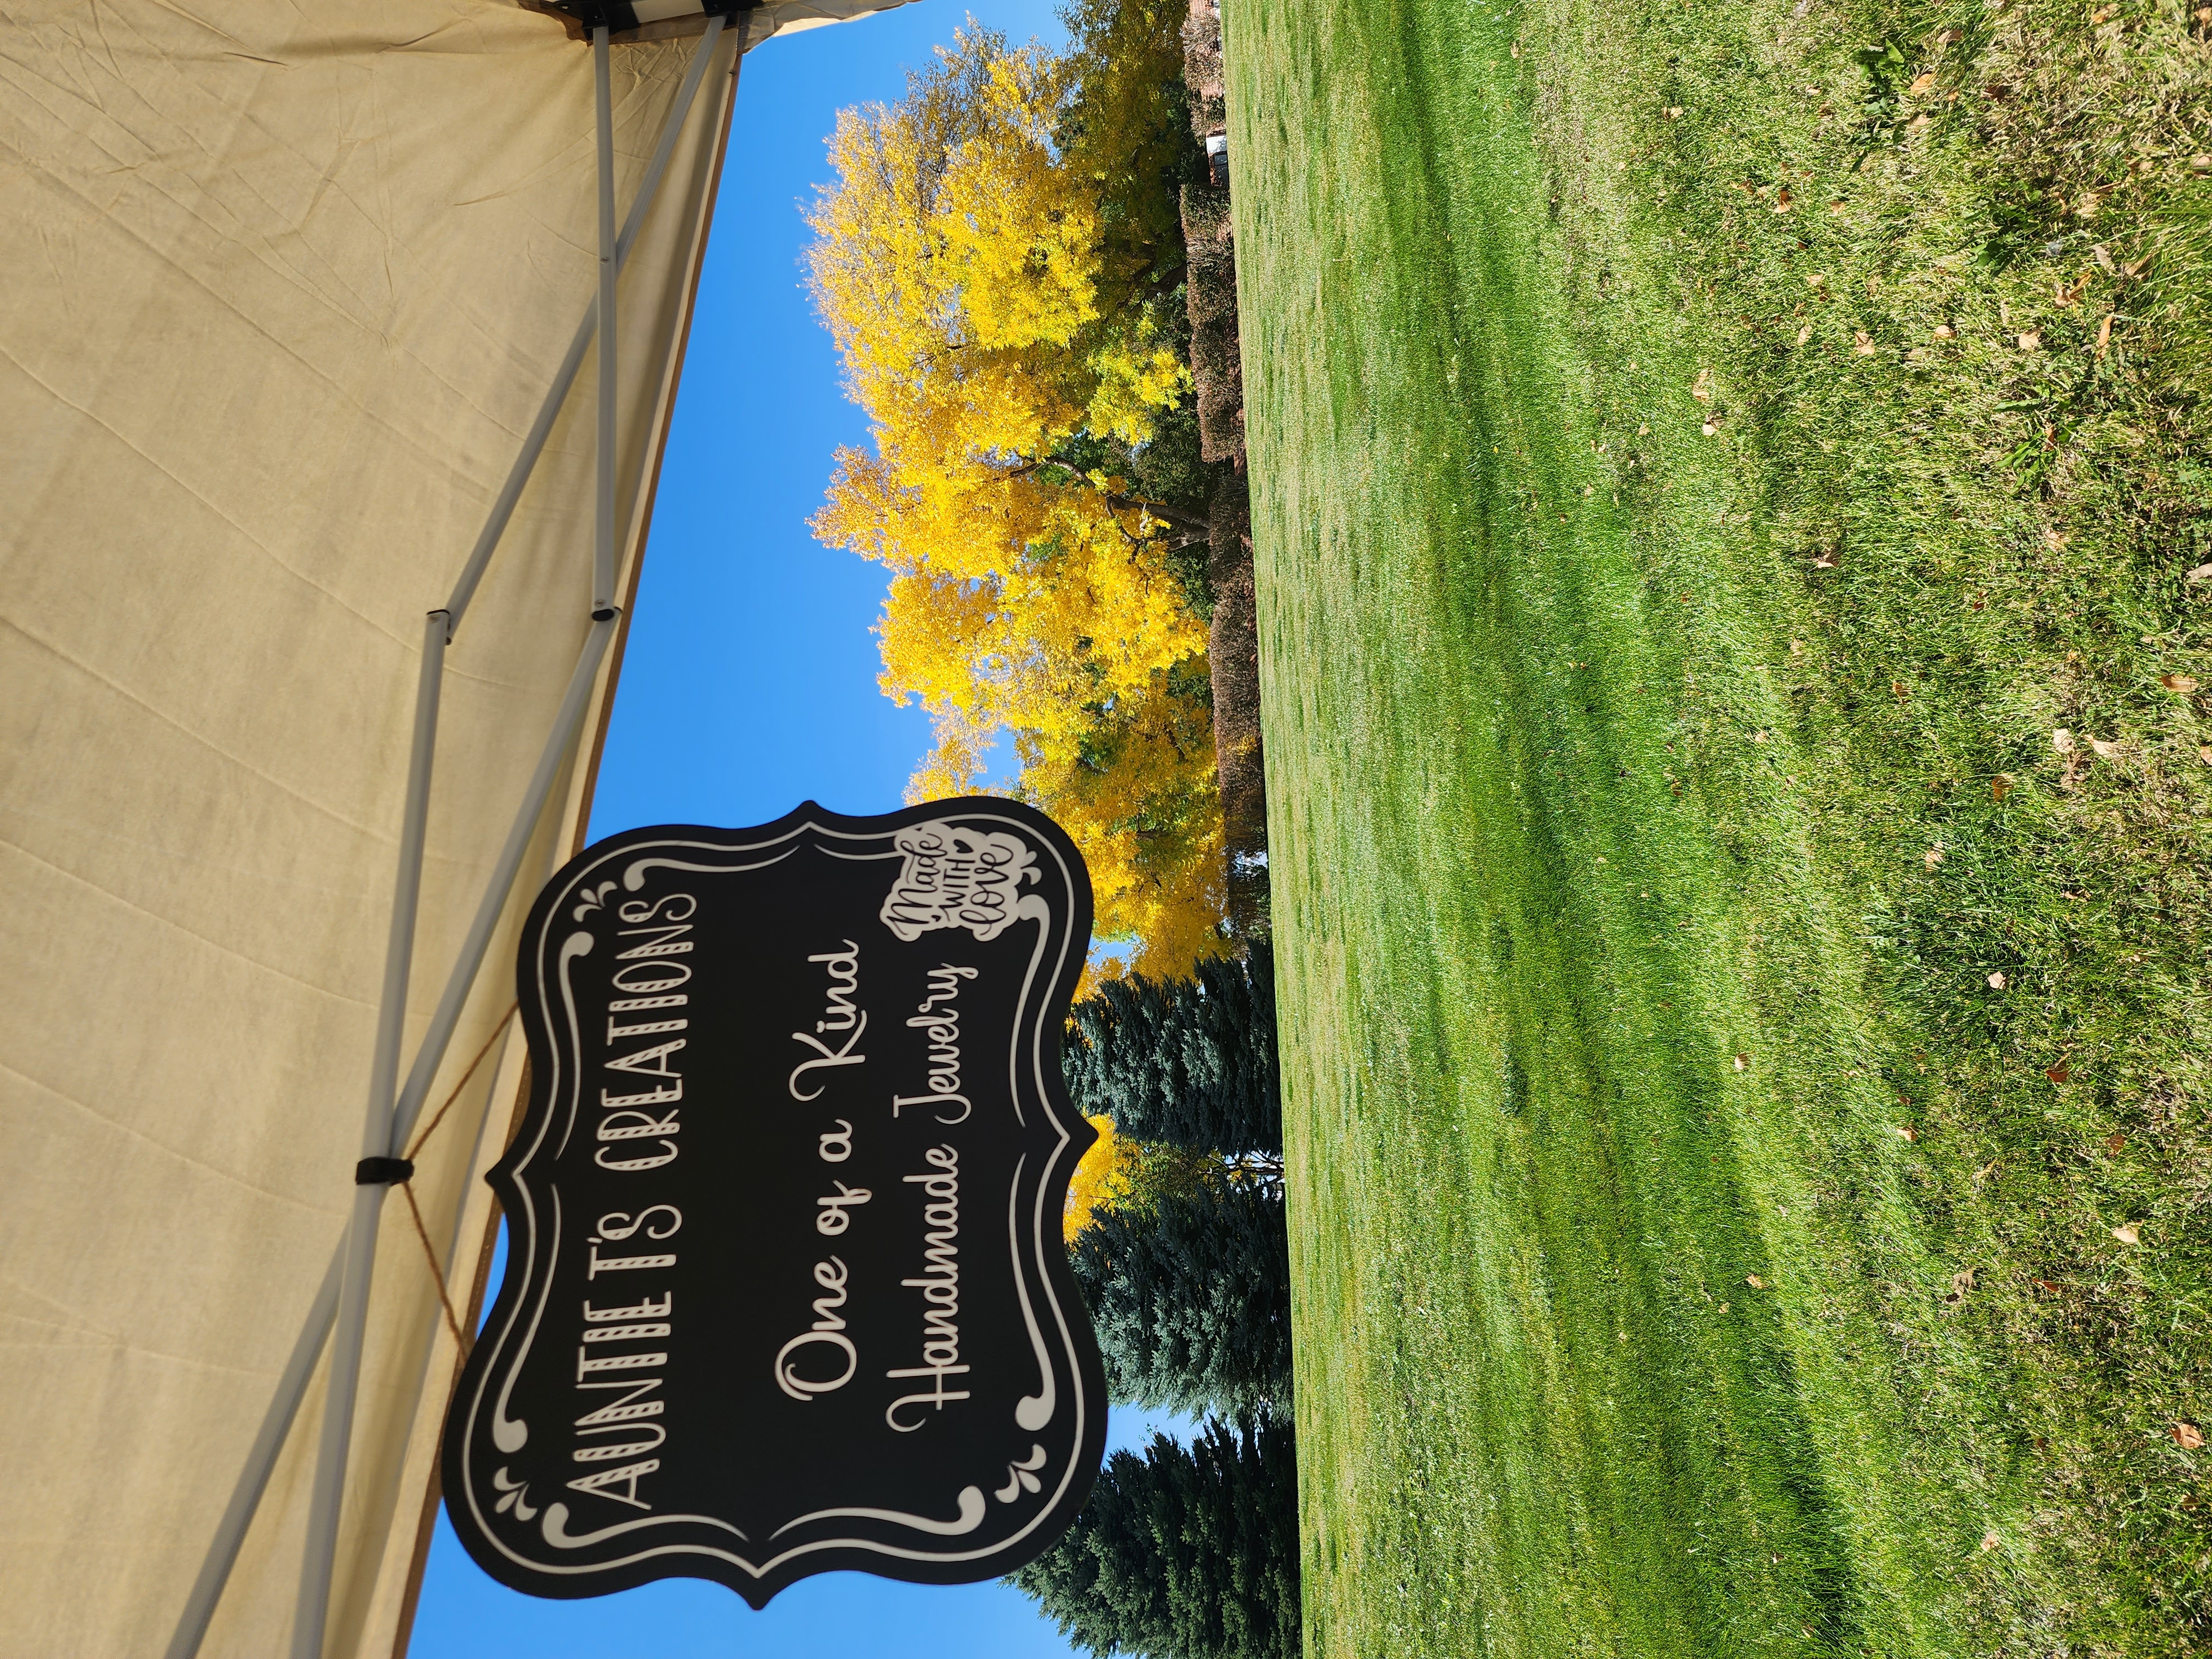 a chalkboard sign reading Auntie T's Creations One of a Kind Handmade Jewelry. The sign is in front of a field with trees in autumn